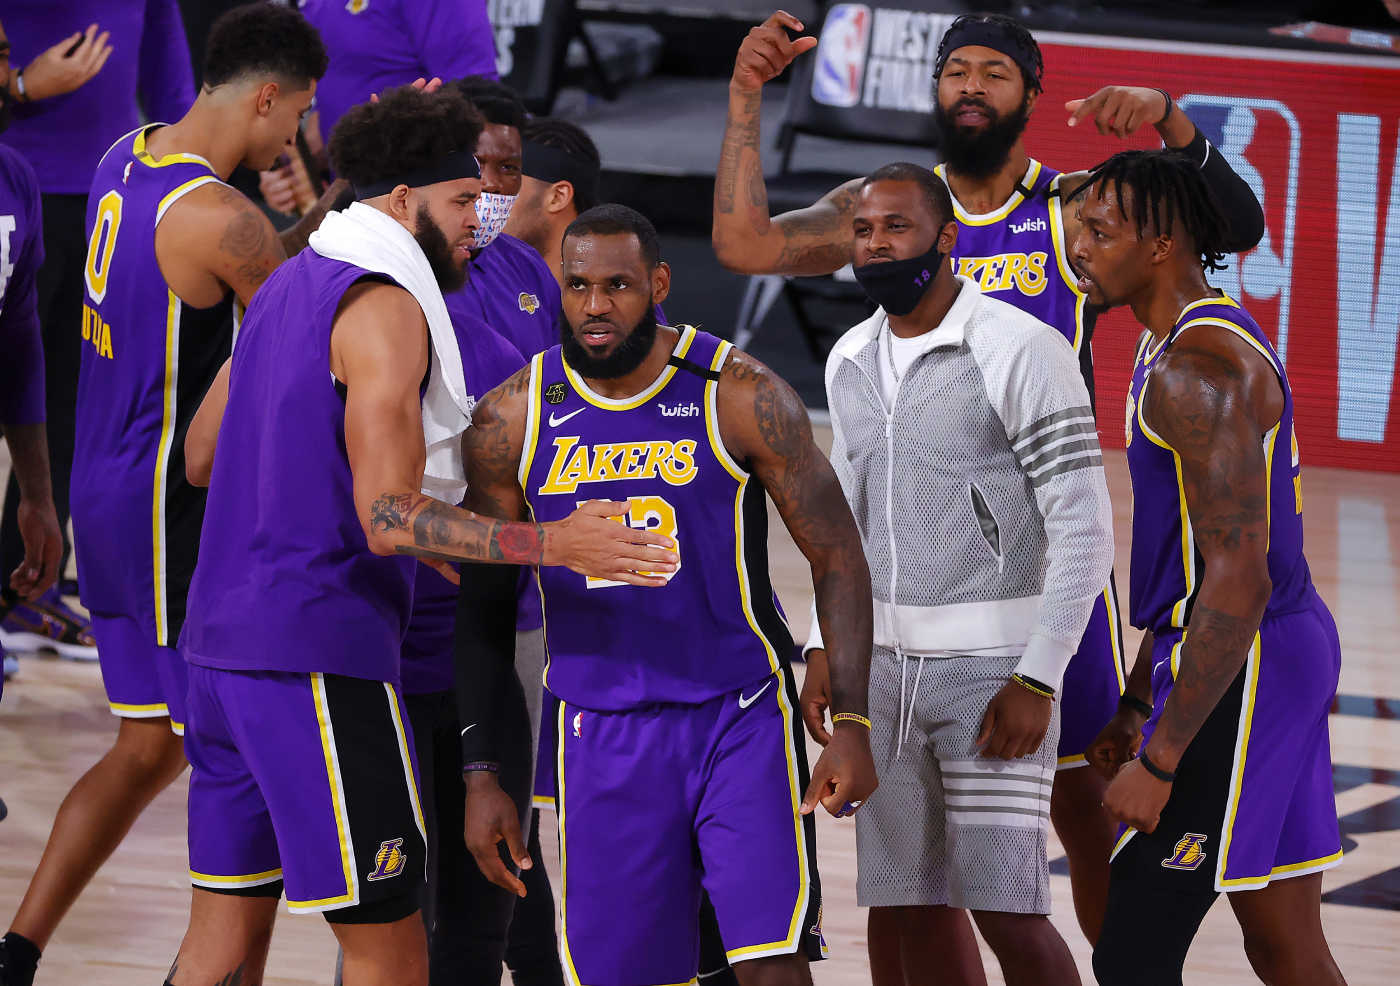 LeBron James and the Lakers just clinched their spot in the NBA Finals. However, Shaquille O'Neal just revealed the team they want to face.